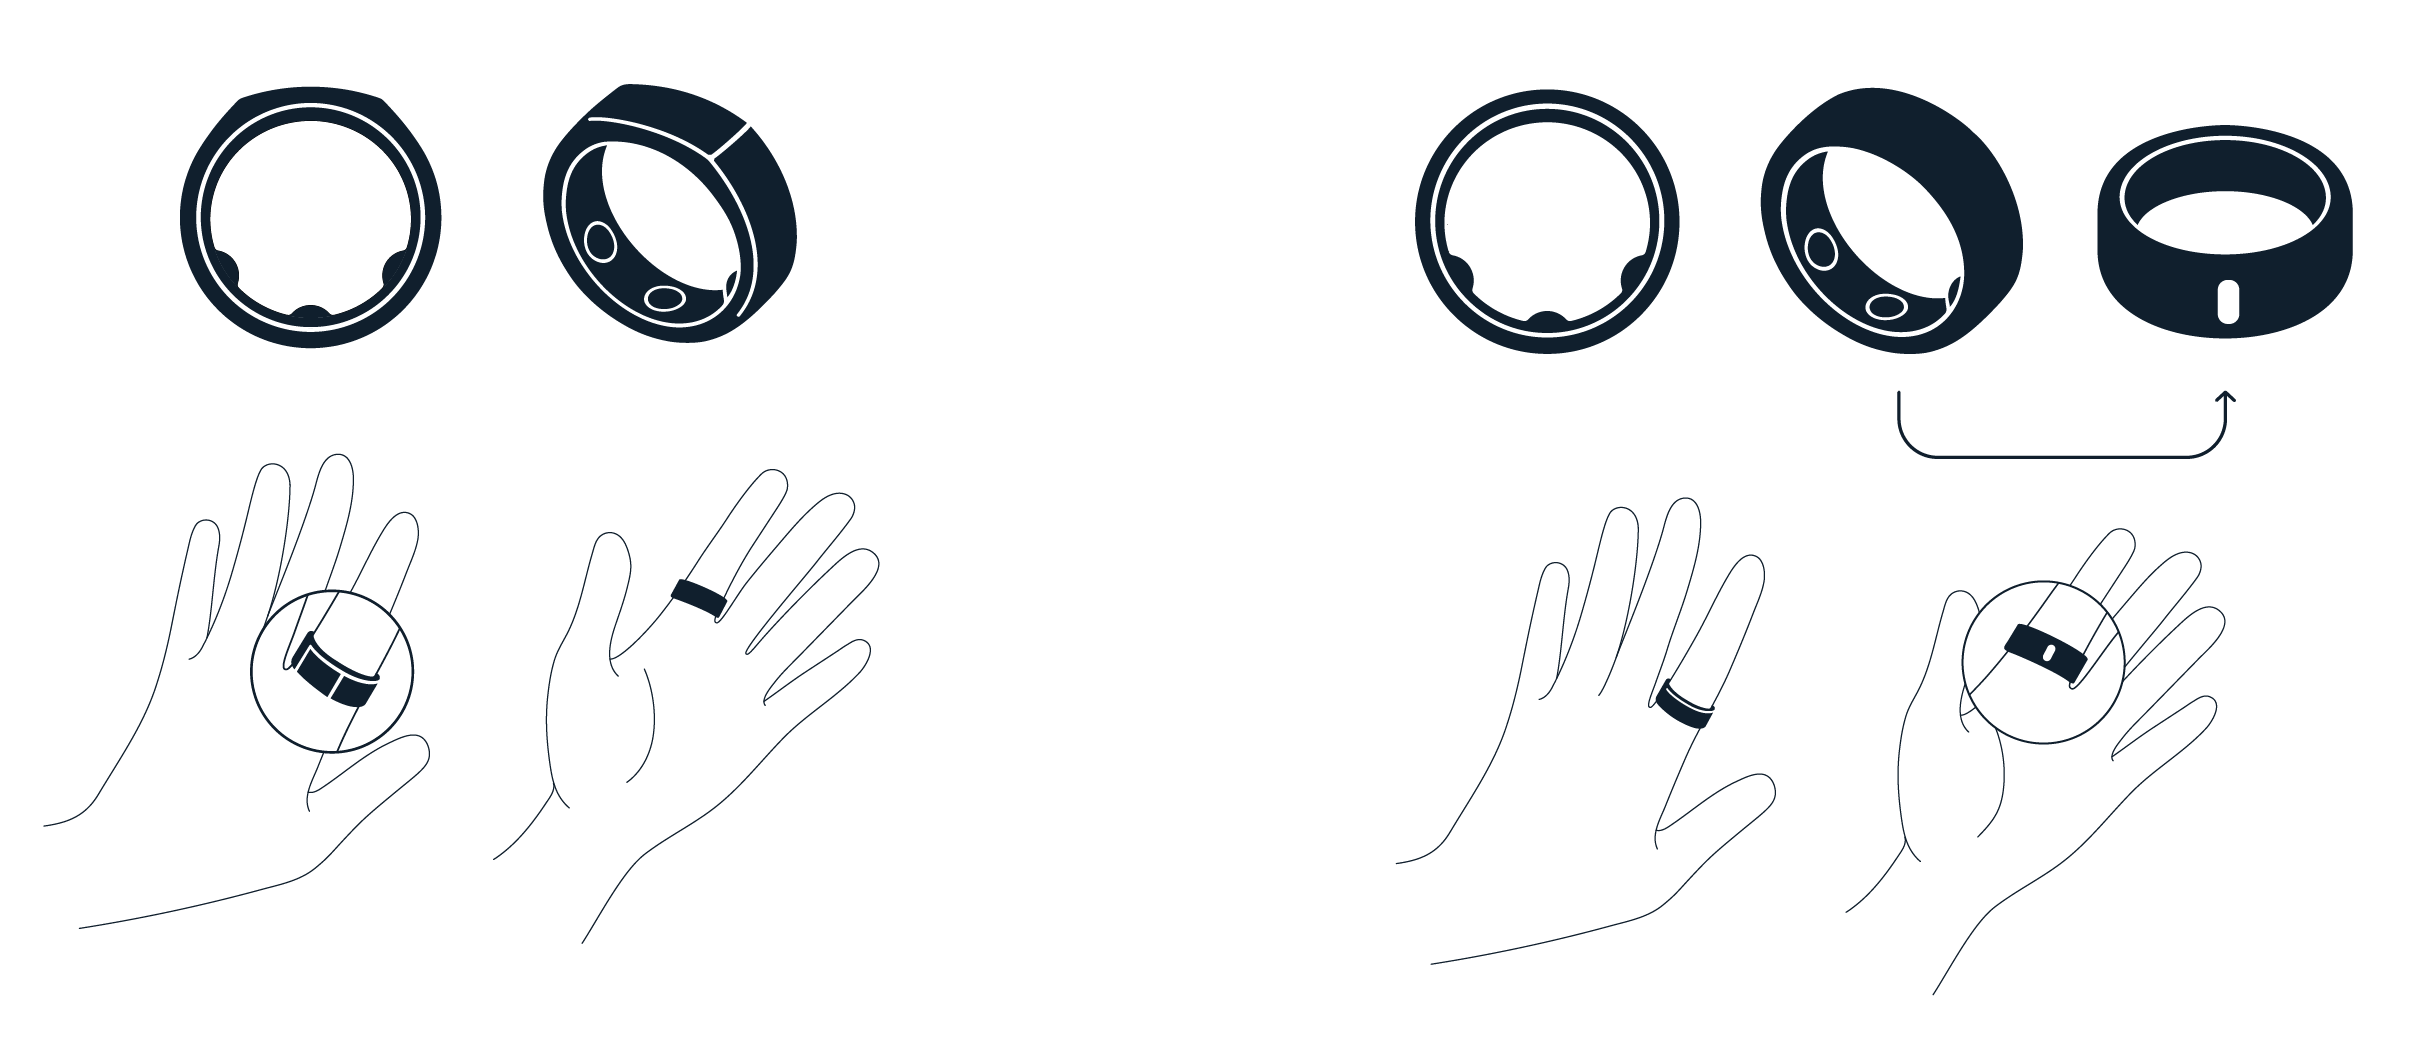 line drawings showing the proper alignment of heritage and horizon oura rings on the finger